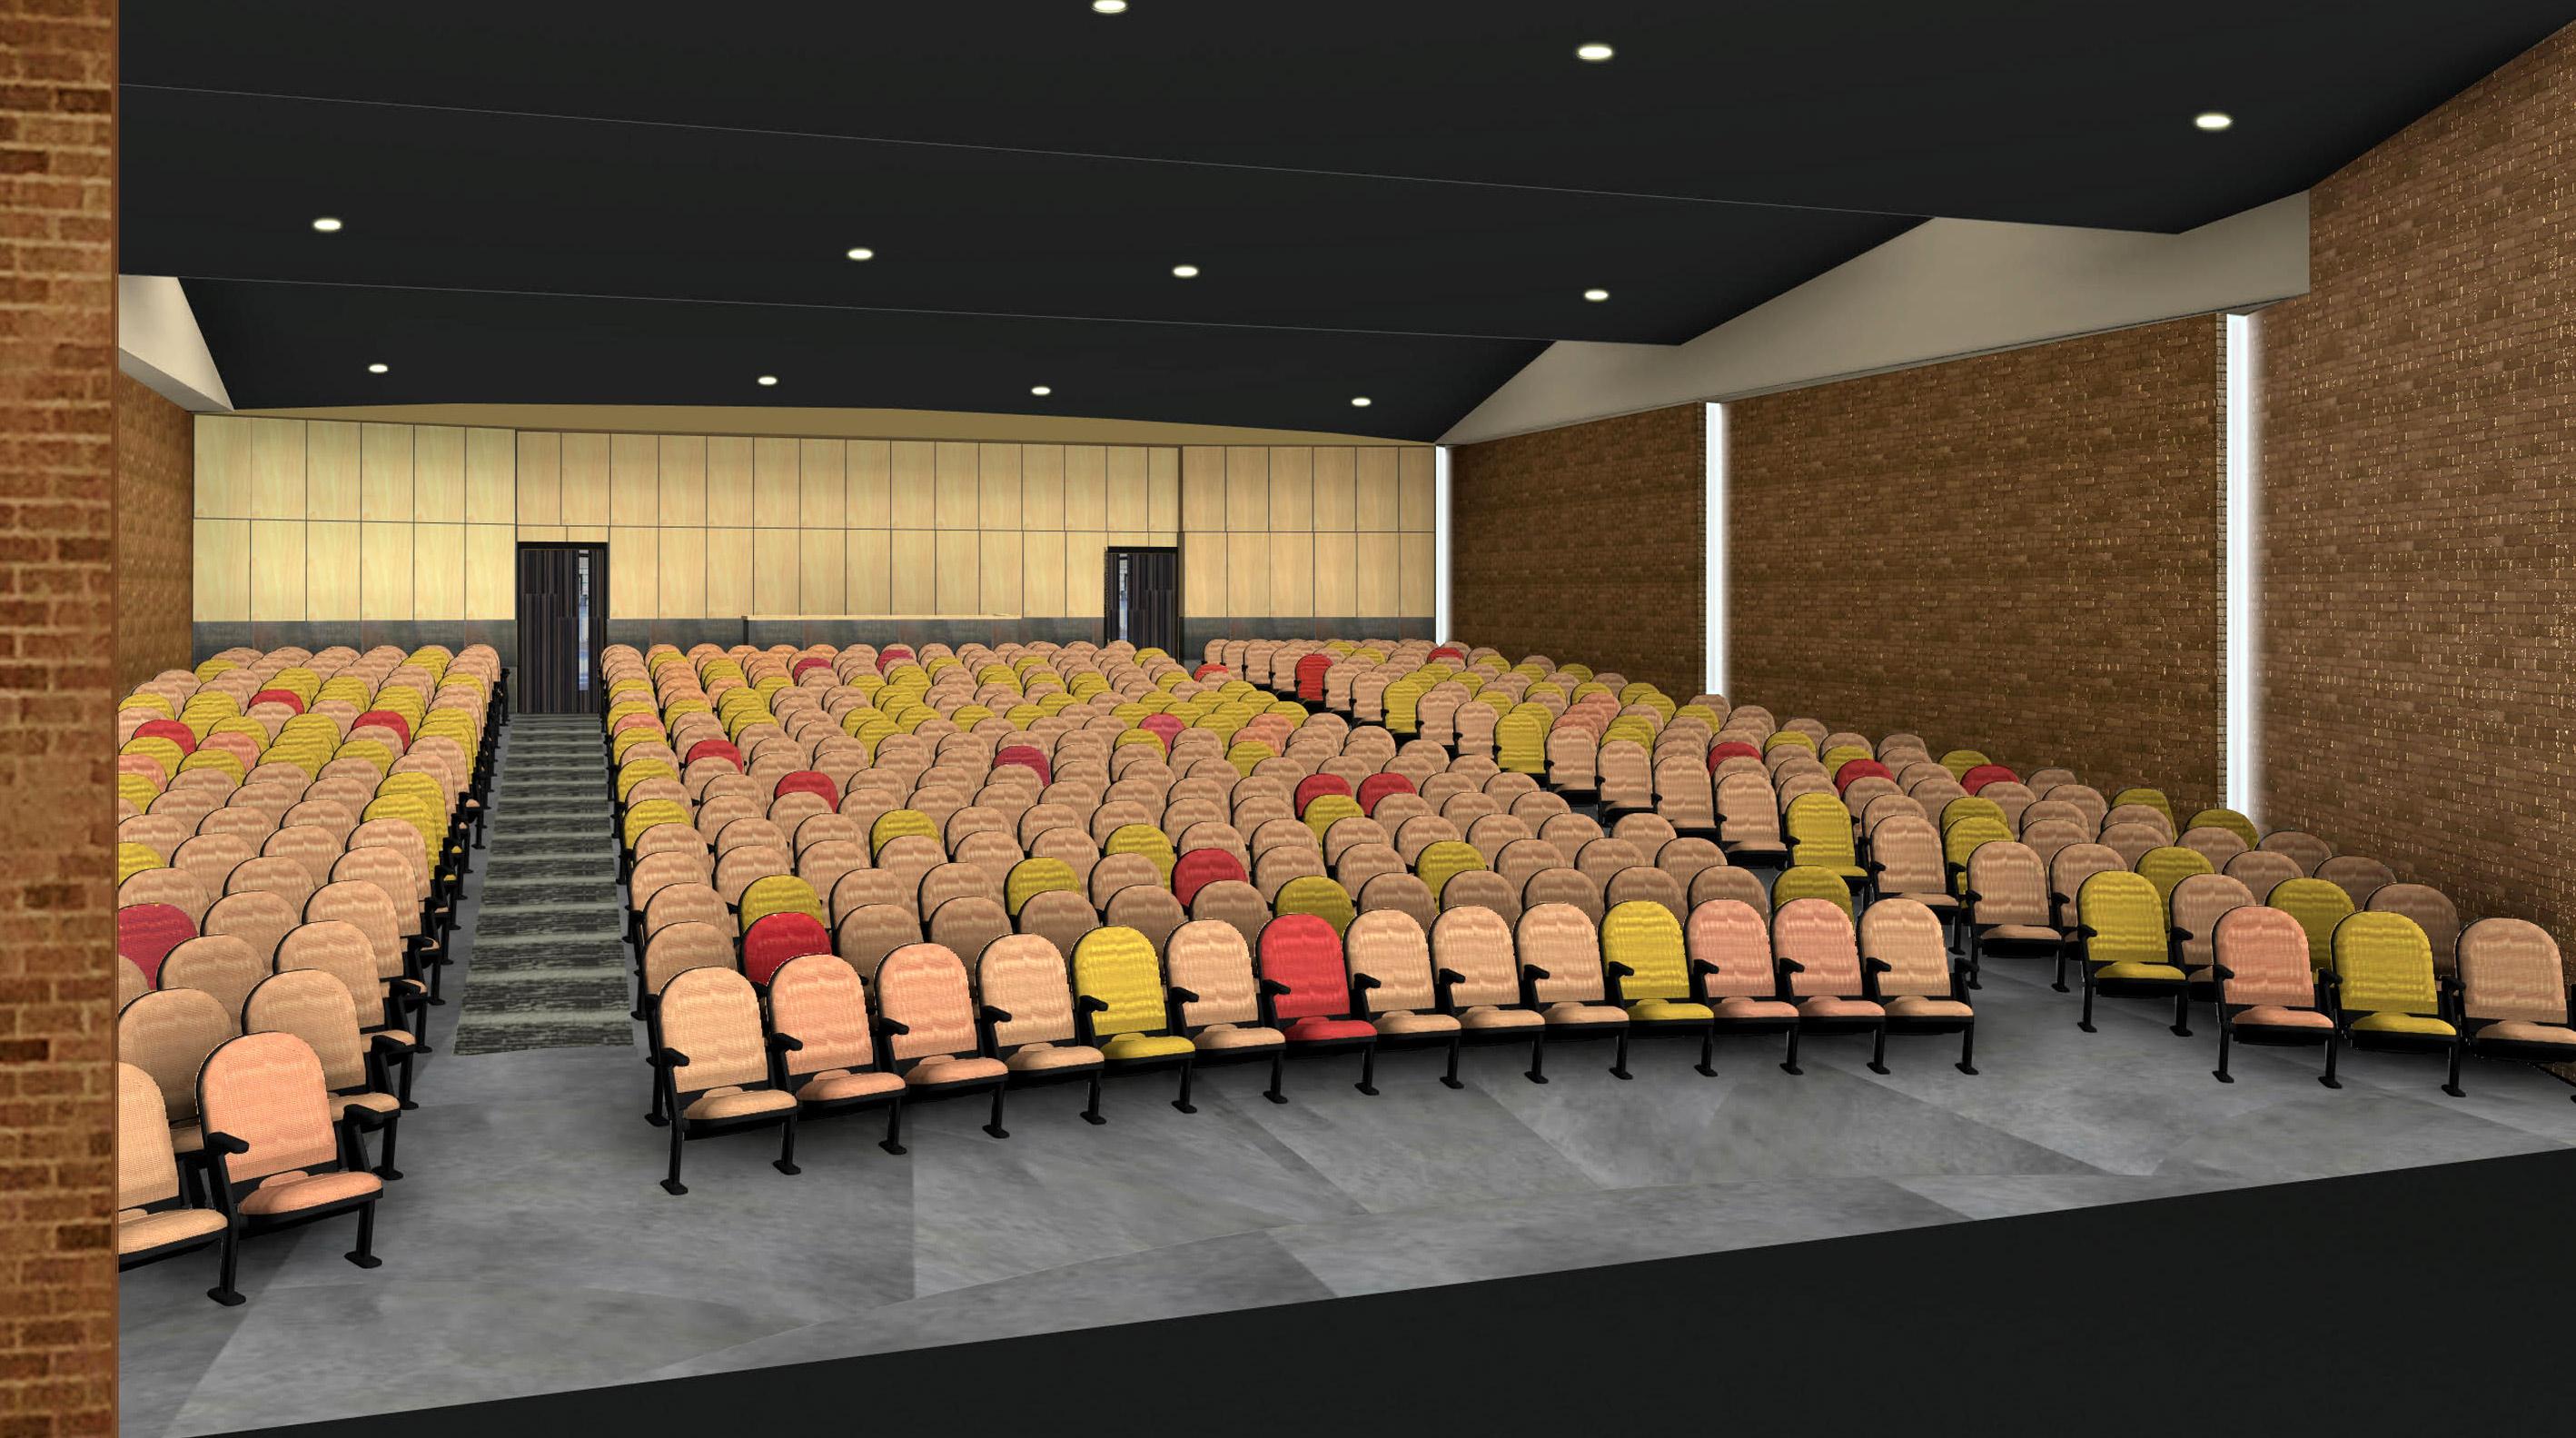 Rendering showing the updated Edson Auditorium interior from the stage looking into the audience seating.